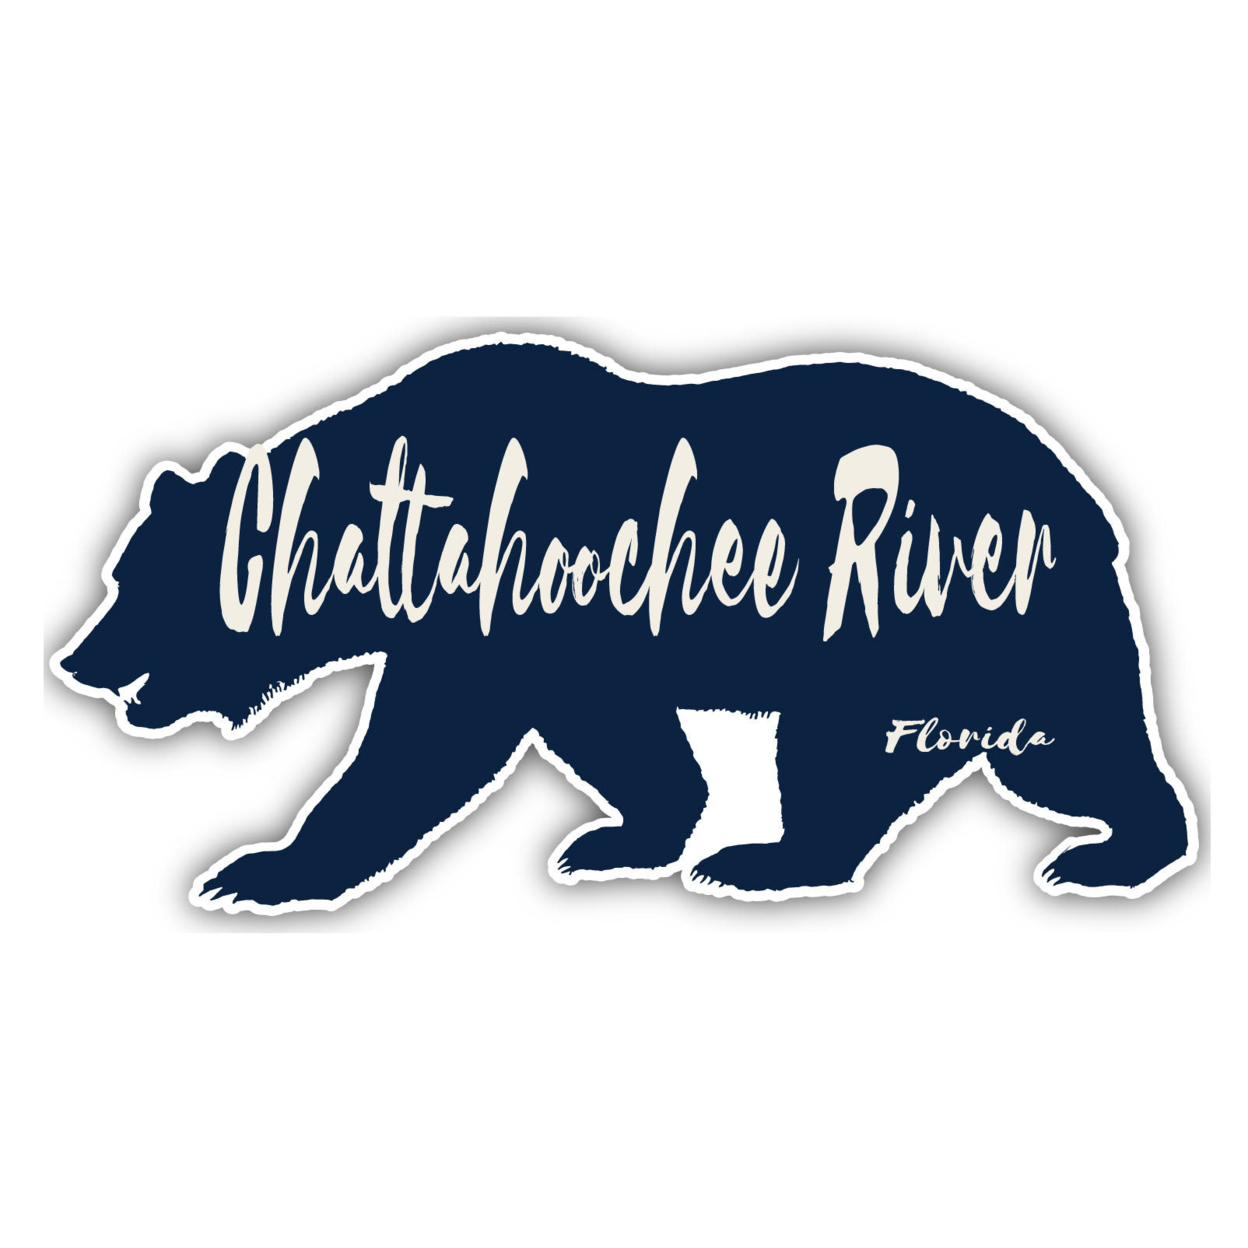 Chattahoochee River Florida Souvenir Decorative Stickers (Choose Theme And Size) - 4-Pack, 6-Inch, Bear